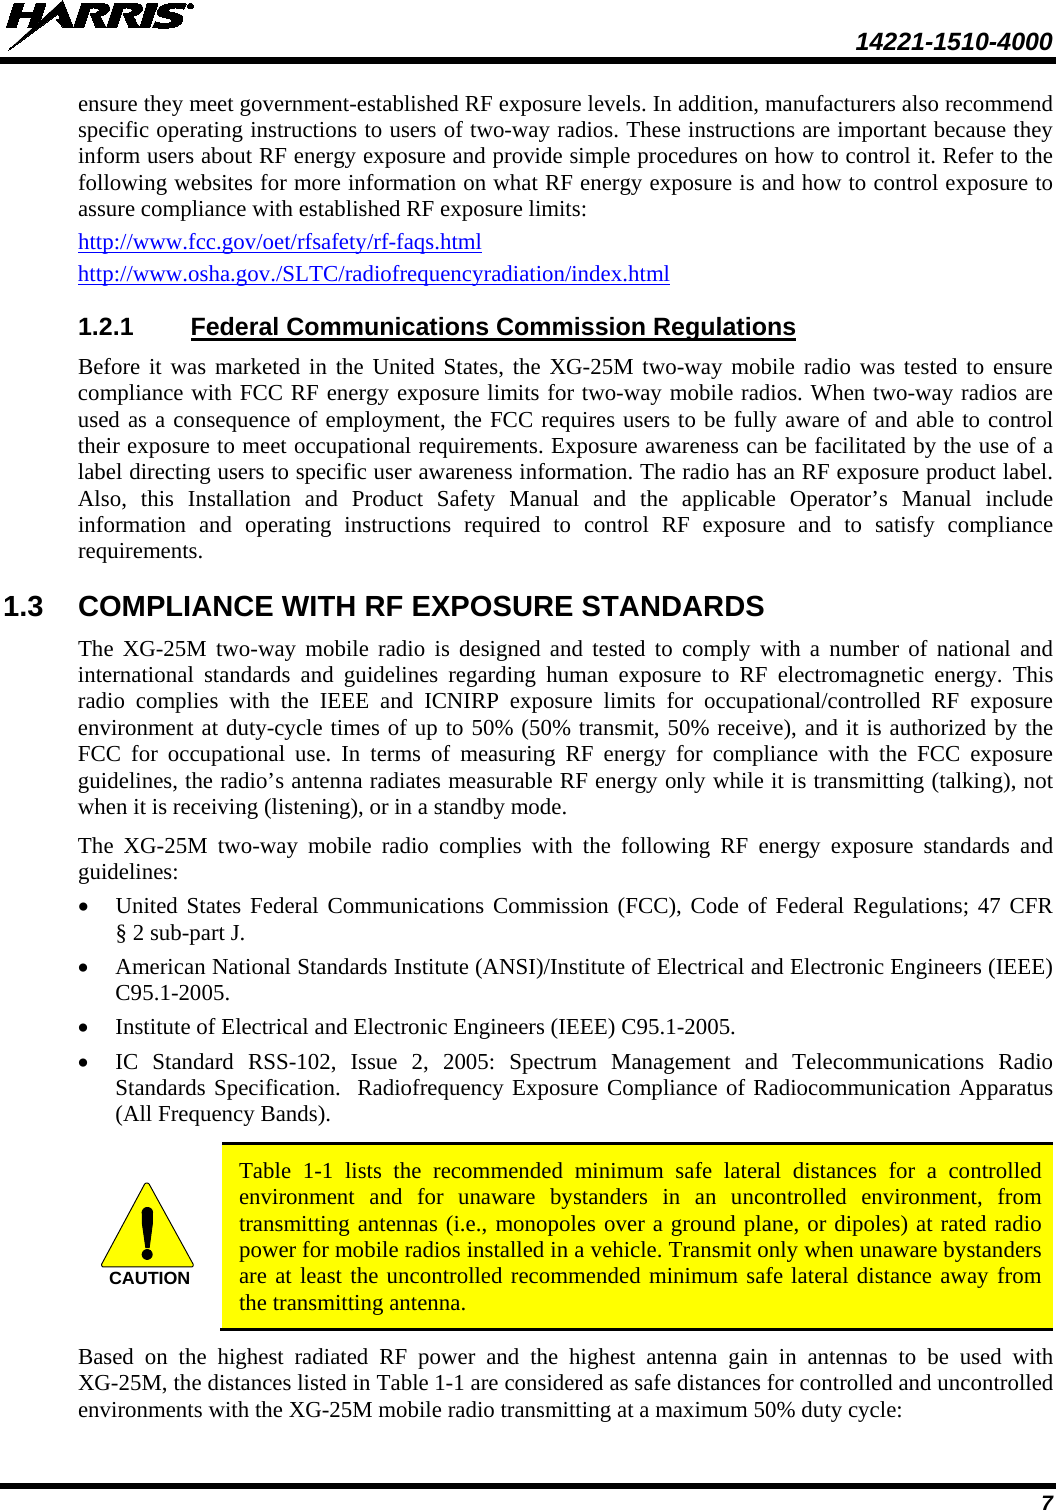  14221-1510-4000 7 ensure they meet government-established RF exposure levels. In addition, manufacturers also recommend specific operating instructions to users of two-way radios. These instructions are important because they inform users about RF energy exposure and provide simple procedures on how to control it. Refer to the following websites for more information on what RF energy exposure is and how to control exposure to assure compliance with established RF exposure limits: http://www.fcc.gov/oet/rfsafety/rf-faqs.html http://www.osha.gov./SLTC/radiofrequencyradiation/index.html 1.2.1 Federal Communications Commission Regulations Before it was marketed in the United States, the XG-25M two-way mobile radio was tested to ensure compliance with FCC RF energy exposure limits for two-way mobile radios. When two-way radios are used as a consequence of employment, the FCC requires users to be fully aware of and able to control their exposure to meet occupational requirements. Exposure awareness can be facilitated by the use of a label directing users to specific user awareness information. The radio has an RF exposure product label. Also,  this  Installation  and Product Safety Manual and the applicable  Operator’s Manual include information and operating instructions required to control RF exposure and to satisfy compliance requirements. 1.3 COMPLIANCE WITH RF EXPOSURE STANDARDS The XG-25M two-way  mobile radio is designed and tested to comply with a number of national and international standards and guidelines regarding human exposure to RF electromagnetic energy. This radio complies with the IEEE and ICNIRP exposure limits for occupational/controlled RF exposure environment at duty-cycle times of up to 50% (50% transmit, 50% receive), and it is authorized by the FCC for occupational use. In terms of measuring RF energy for compliance with the FCC exposure guidelines, the radio’s antenna radiates measurable RF energy only while it is transmitting (talking), not when it is receiving (listening), or in a standby mode. The  XG-25M two-way  mobile  radio complies with the following RF energy exposure standards and guidelines: • United States Federal Communications Commission (FCC), Code of Federal Regulations; 47 CFR § 2 sub-part J. • American National Standards Institute (ANSI)/Institute of Electrical and Electronic Engineers (IEEE) C95.1-2005. • Institute of Electrical and Electronic Engineers (IEEE) C95.1-2005. • IC  Standard RSS-102, Issue 2, 2005: Spectrum Management and Telecommunications Radio Standards Specification.  Radiofrequency Exposure Compliance of Radiocommunication Apparatus (All Frequency Bands).   Table  1-1  lists  the recommended minimum safe  lateral distances for a controlled environment and for unaware bystanders in an uncontrolled environment, from transmitting antennas (i.e., monopoles over a ground plane, or dipoles) at rated radio power for mobile radios installed in a vehicle. Transmit only when unaware bystanders are at least the uncontrolled recommended minimum safe lateral distance away from the transmitting antenna. Based on the highest radiated RF power and the highest antenna gain in antennas to be used with XG-25M, the distances listed in Table 1-1 are considered as safe distances for controlled and uncontrolled environments with the XG-25M mobile radio transmitting at a maximum 50% duty cycle: CAUTION